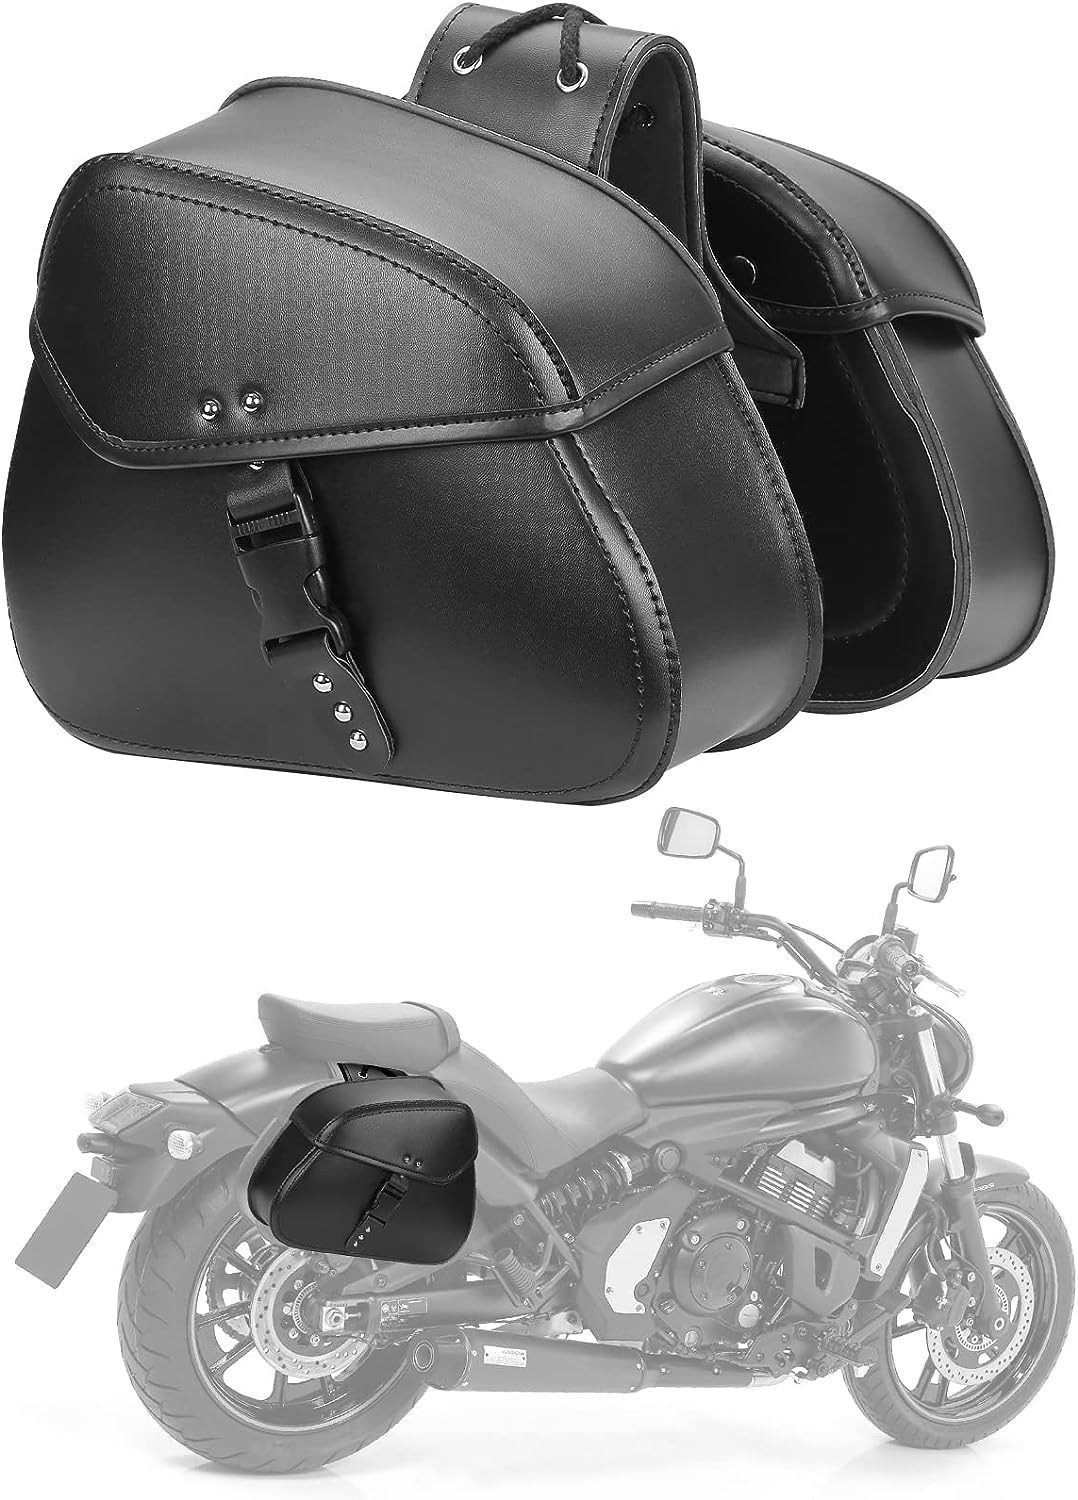 24L PU Leather Motorcycle Saddlebags